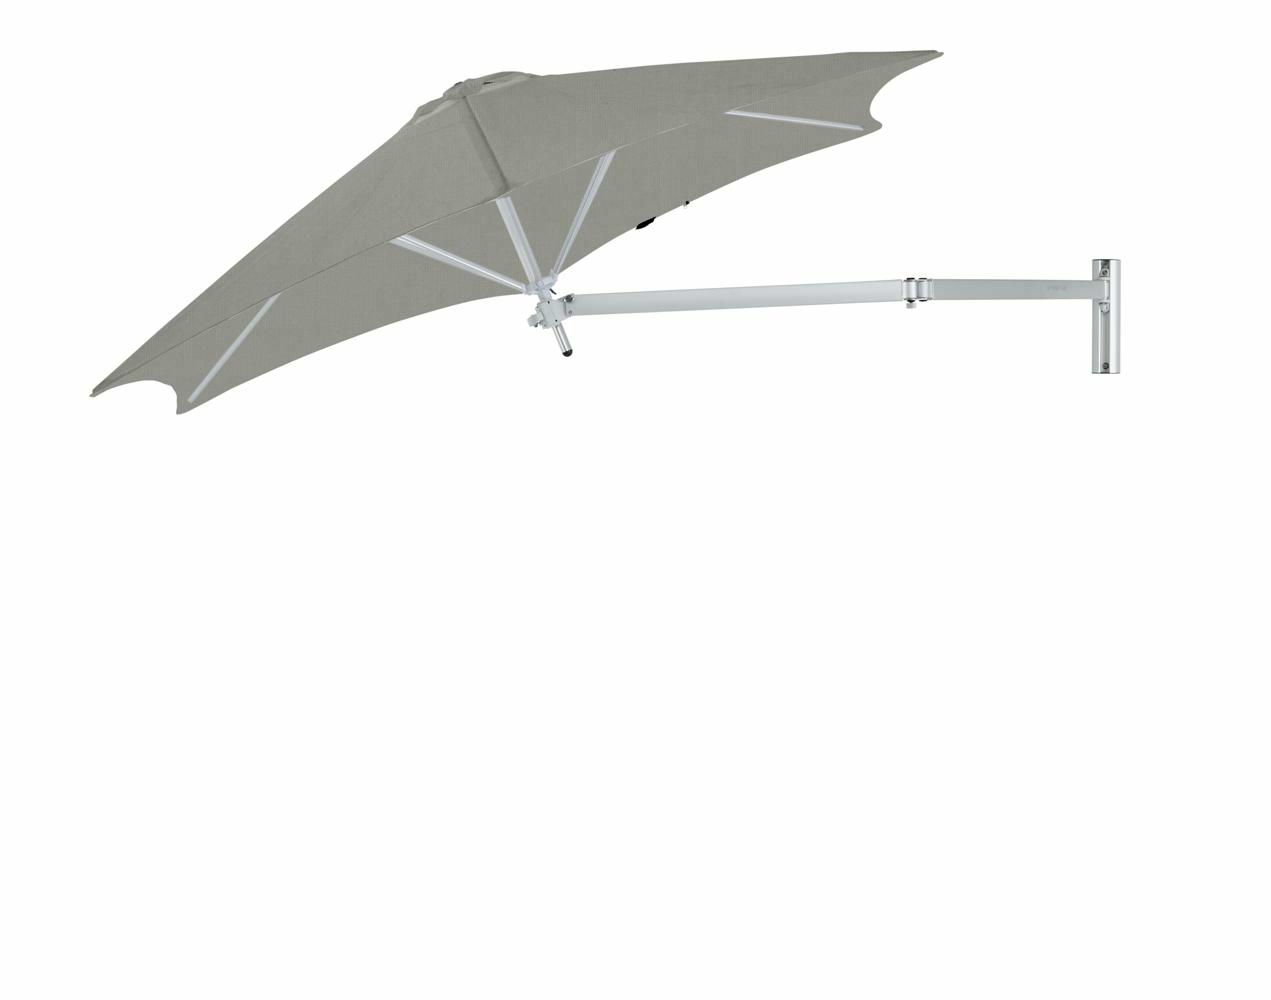 Paraflex wall mounted parasols round 2,7 m with Grey fabric and a Neo arm